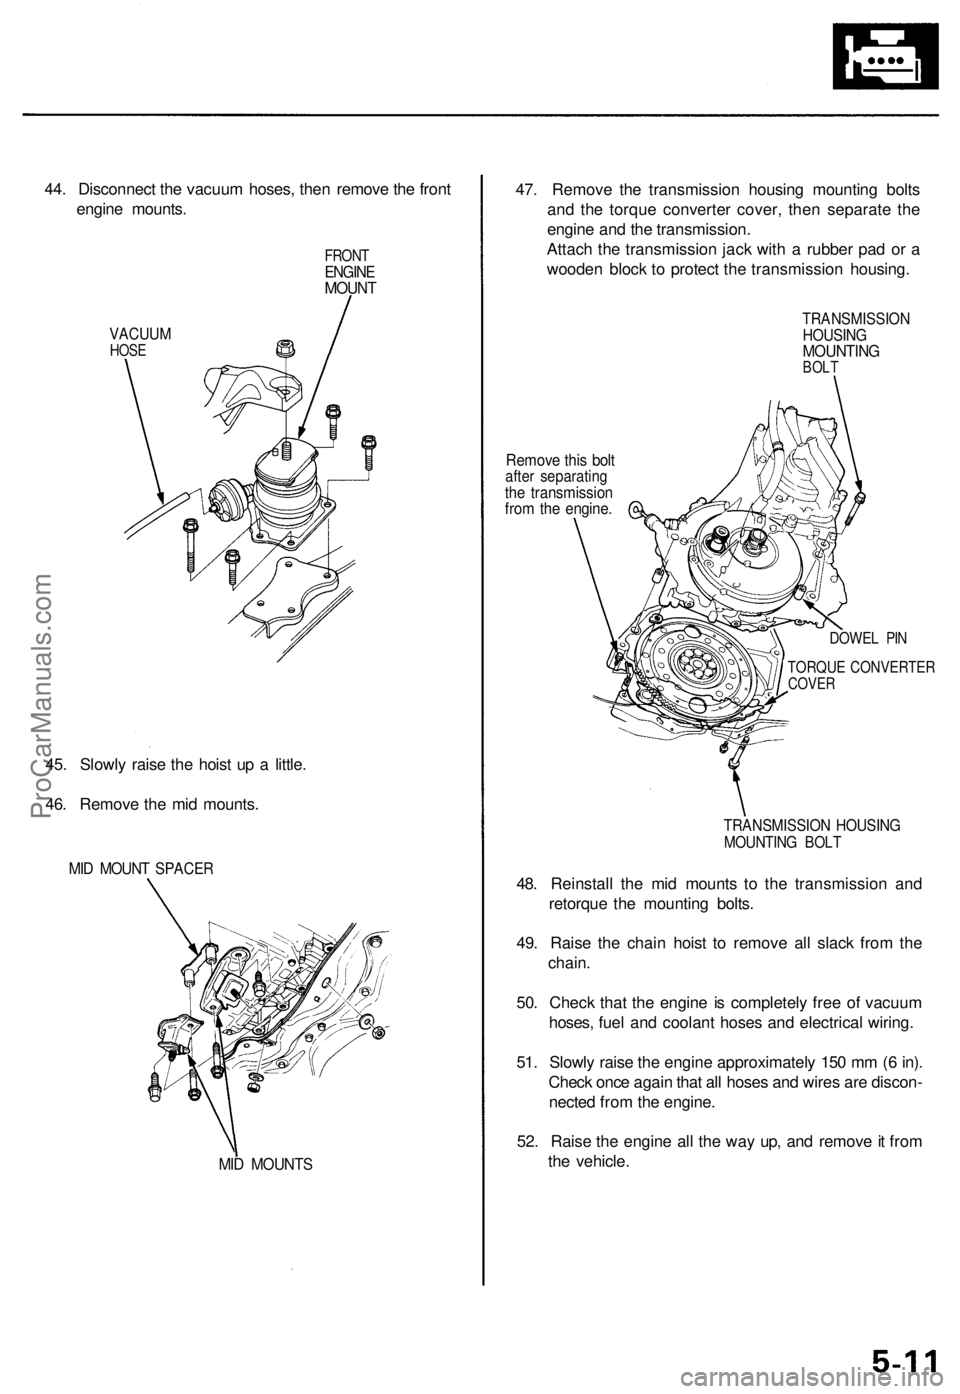 ACURA TL 1995  Service Owners Guide 
44. Disconnect the vacuum hoses, then remove the front

engine mounts.

VACUUM

HOSE 
FRONT

ENGINE

MOUNT

45. Slowly raise the hoist up a little.

46. Remove the mid mounts.

MID MOUNT SPACER

MID 